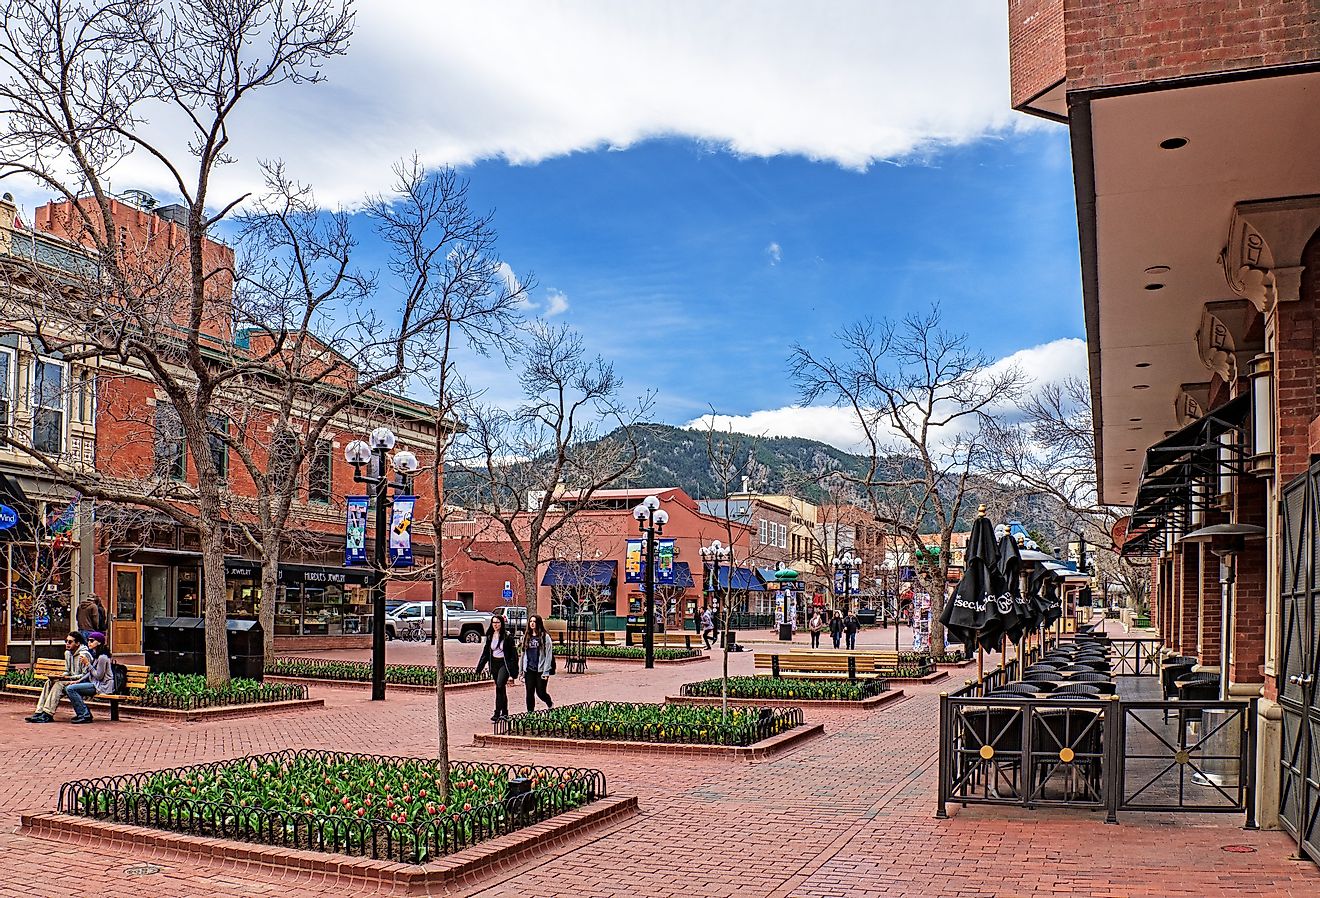 Boulder, Colorado, early spring at the Pearl Street Mall. Image credit randy andy via Shutterstock